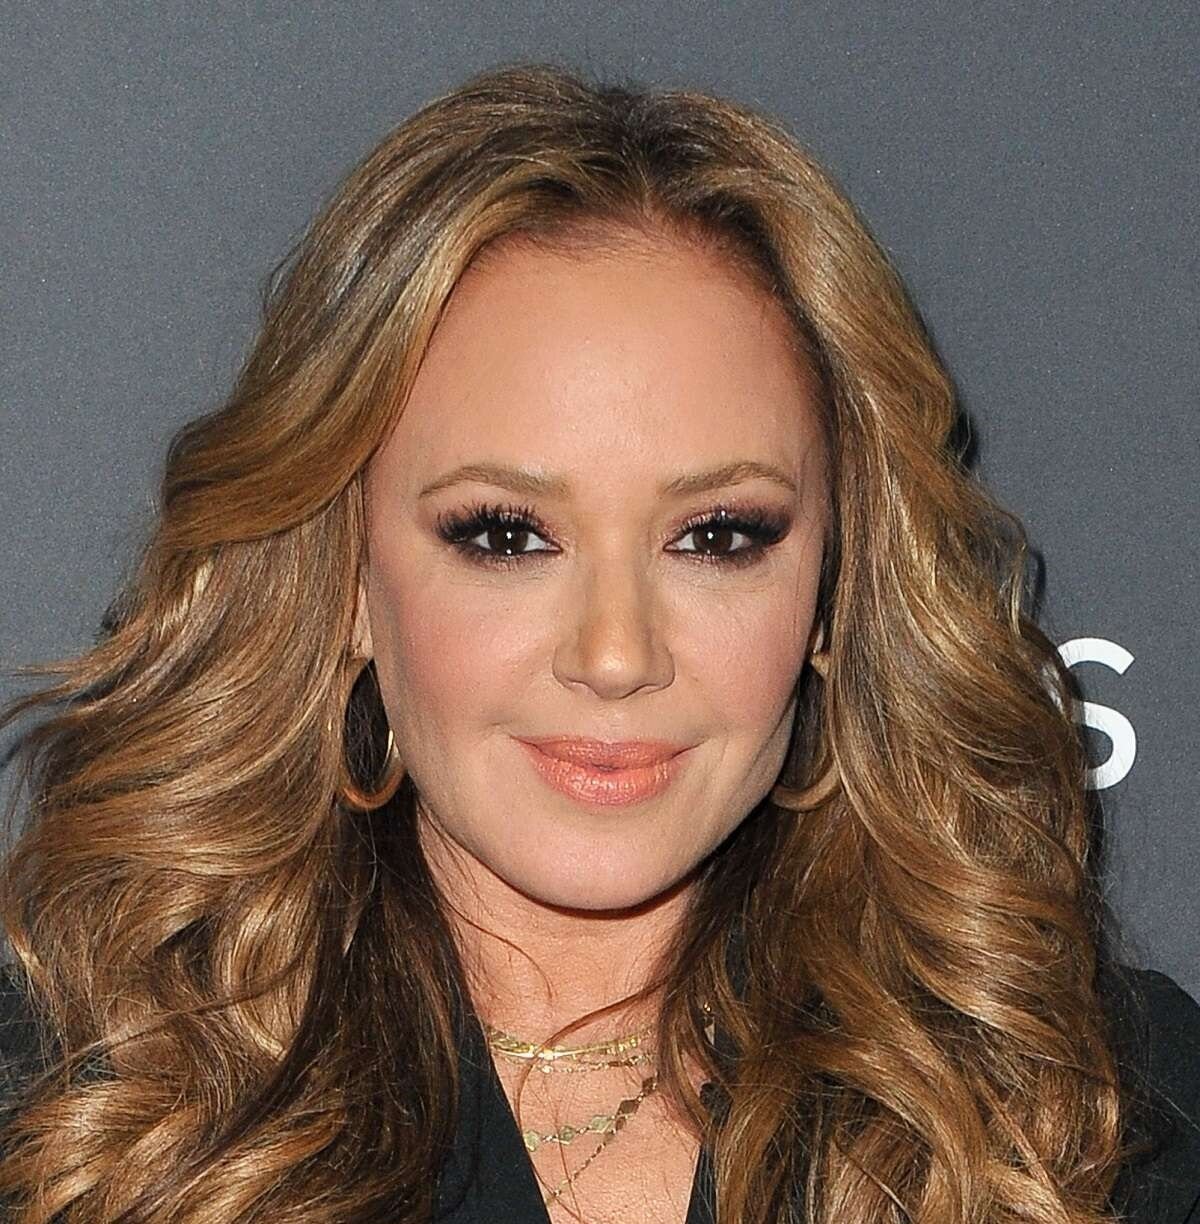 Leah Remini poses for a photo prior to the "Dancing With The Stars" Season 28 show at CBS Televison City